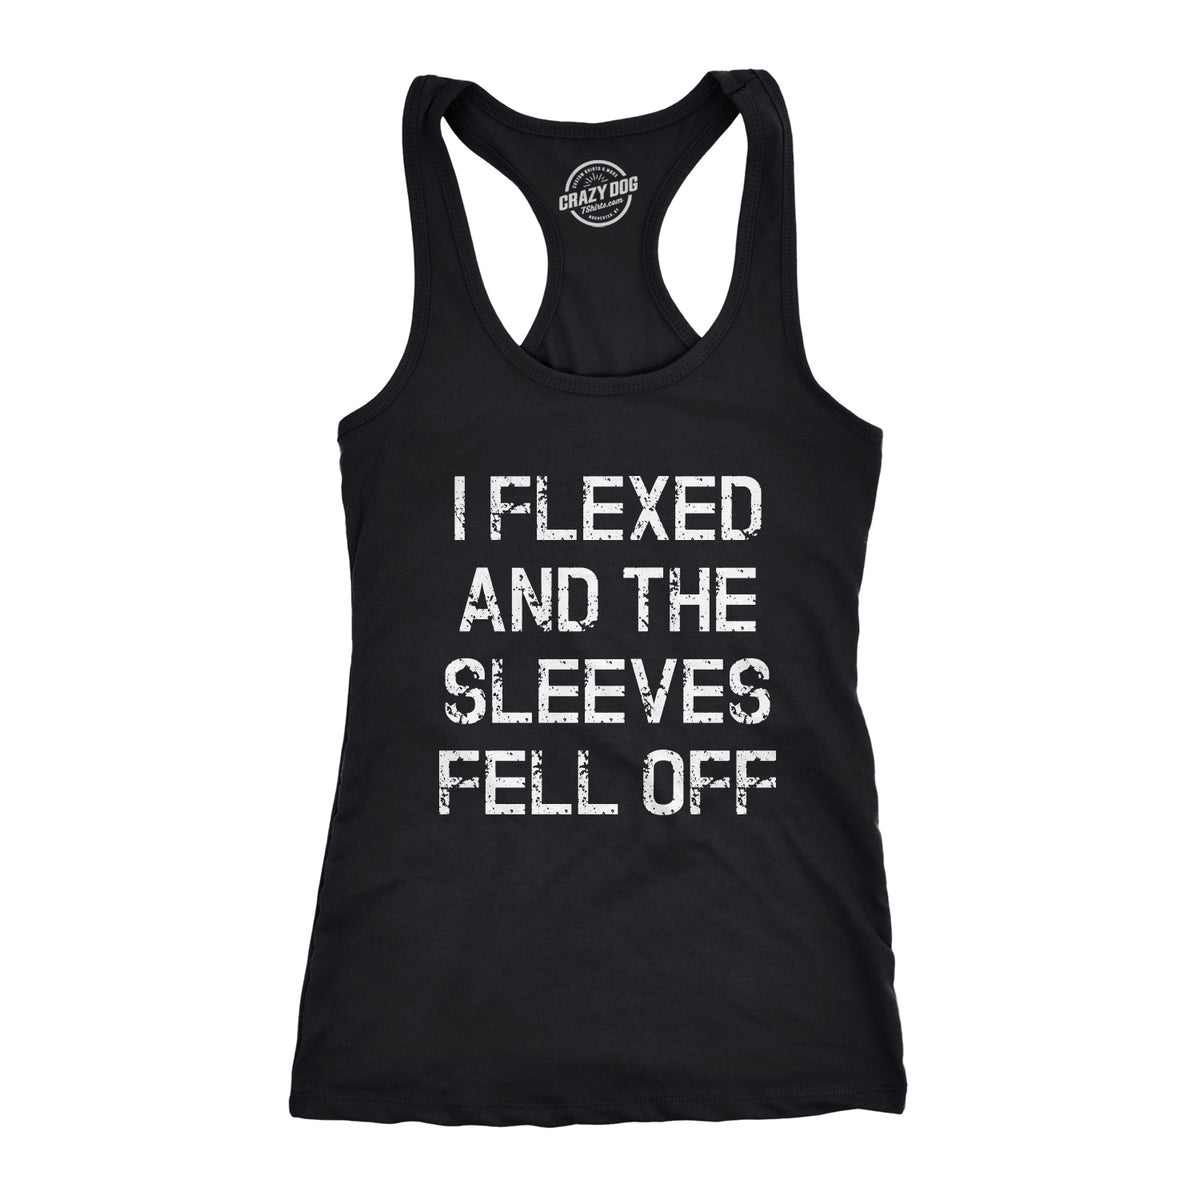 Funny Black I Flexed And The Sleeves Fell Off Womens Tank Top Nerdy Fitness Tee